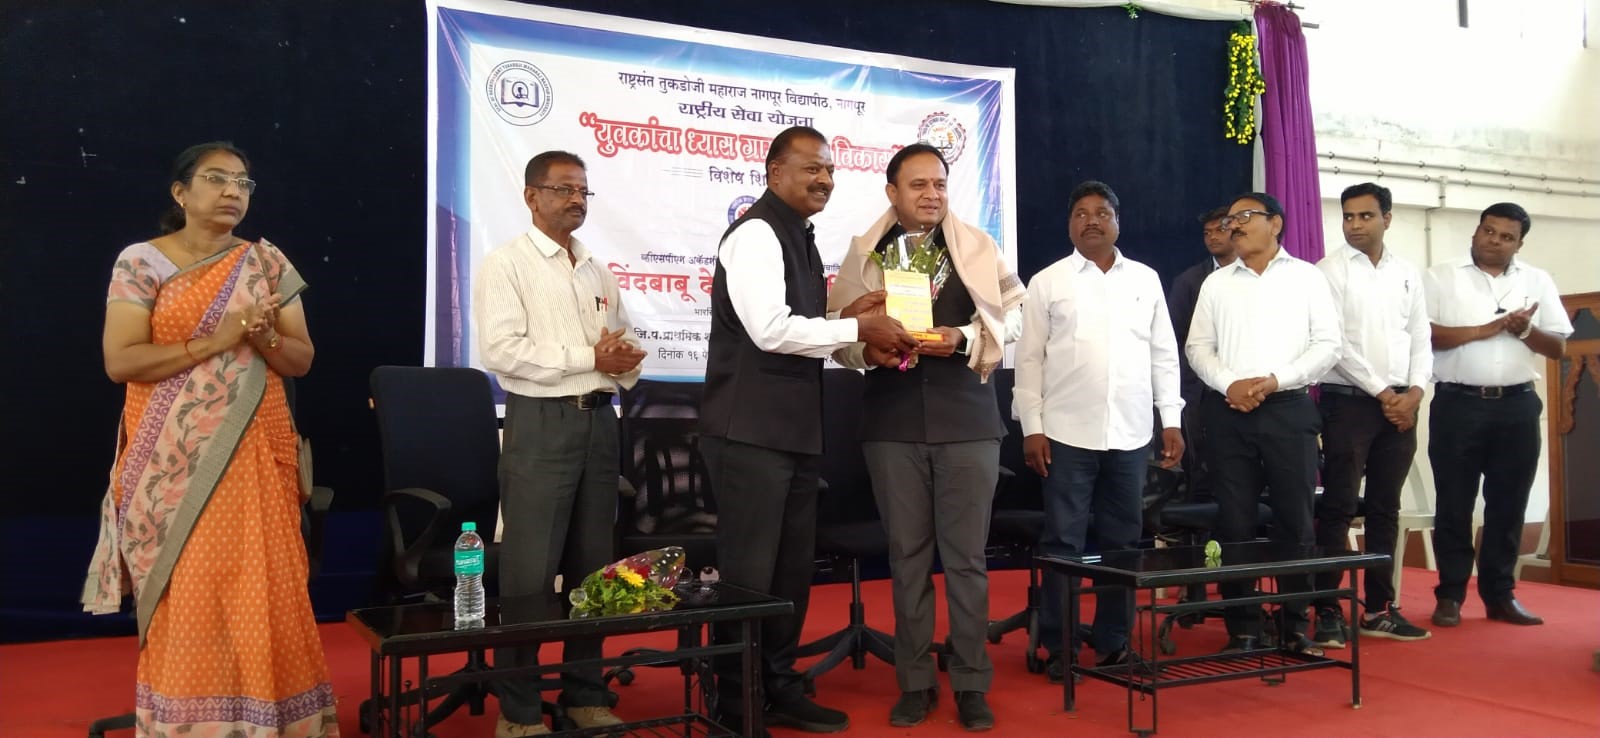 <p>NSS camp valedictory programme was held on 21st February 2023 for this programme chief guest was Dr. Devendra Bhongade, Principal, Jeeven Vikas Mahavidyalaya, Devgram.</p>
